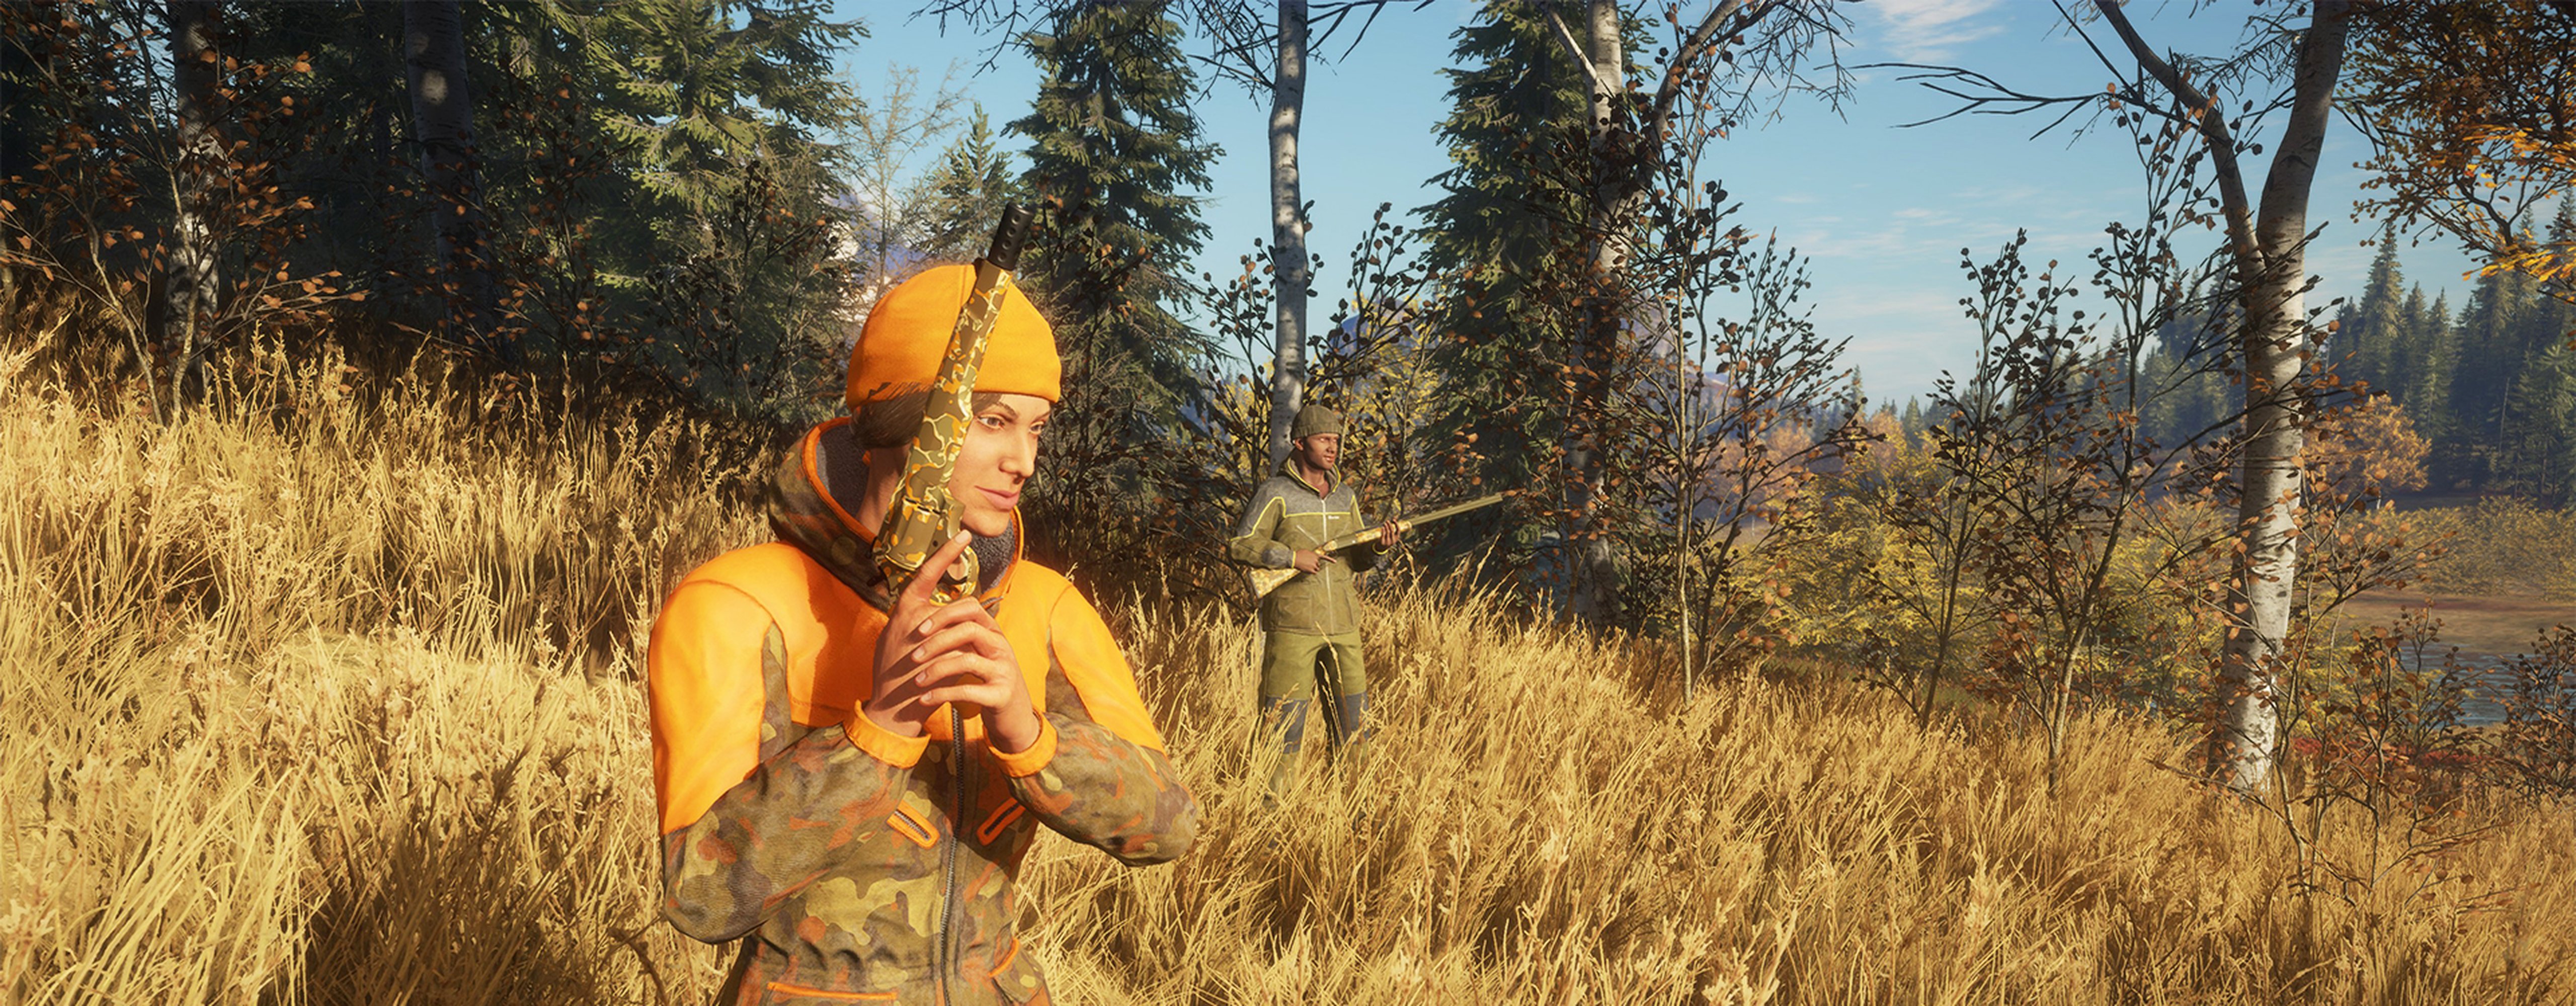 A third person multiplayer screeenshot displaying some of theHunter: Call of the Wild's premium Layton Lake Cosmetic Pack options in use.